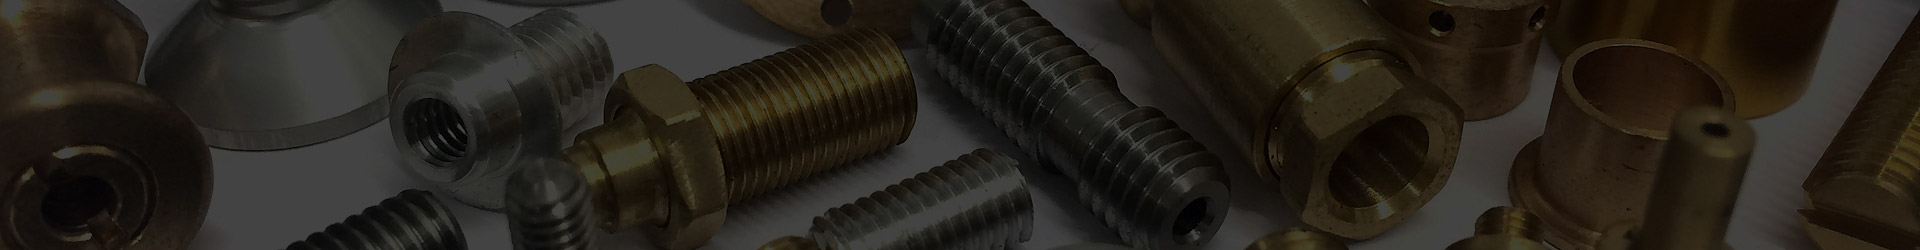 Brass Parts For Fire Fighting Equipment